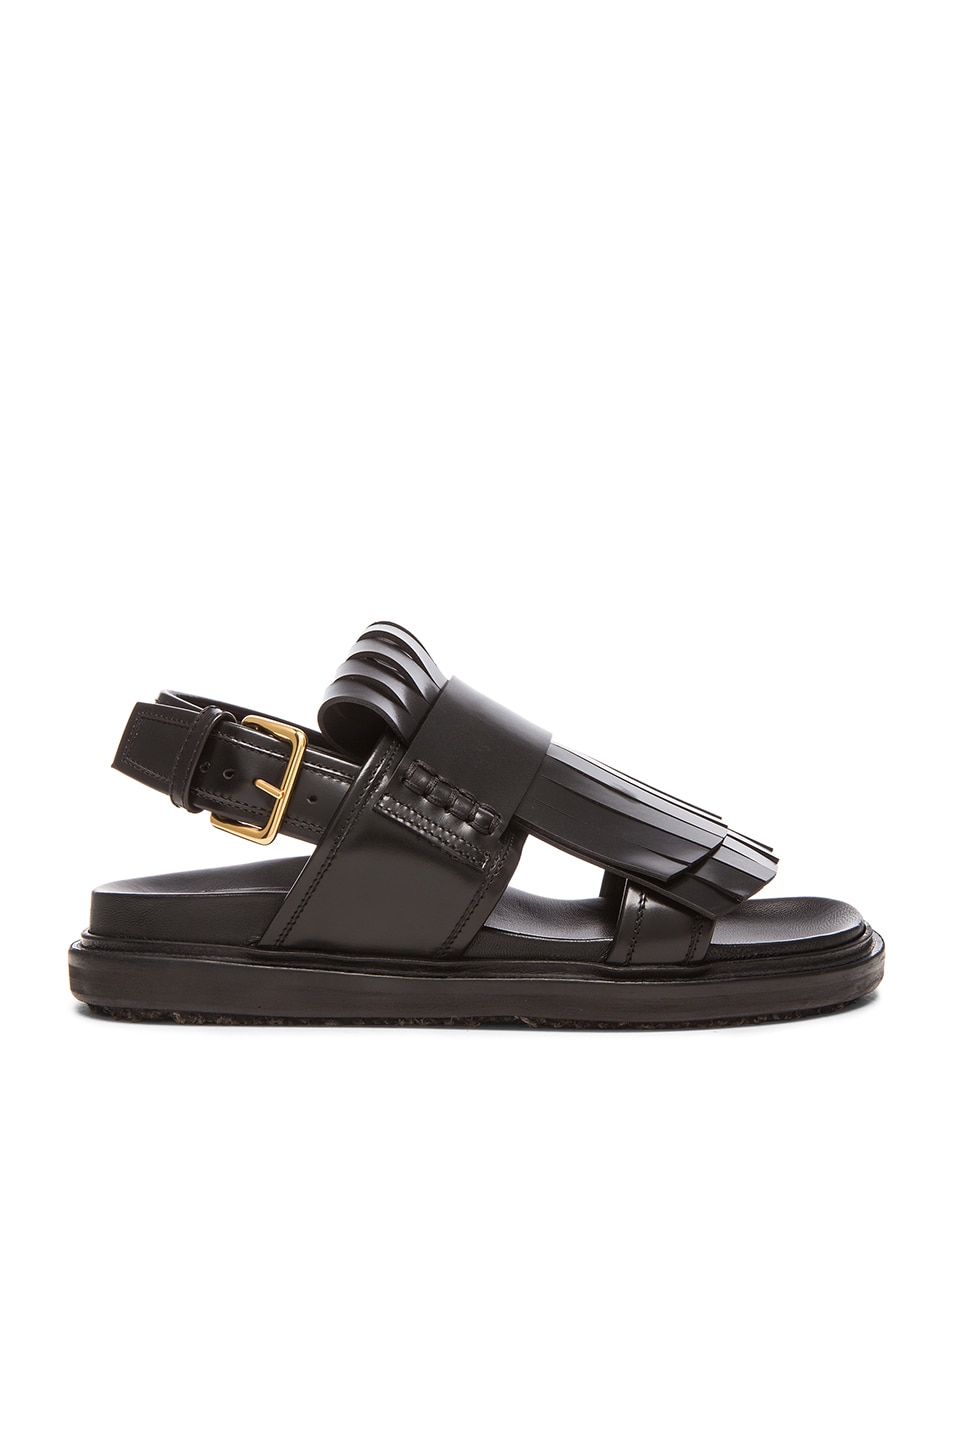 Image 1 of Marni Loafer Fussbett Leather Sandals in Coal